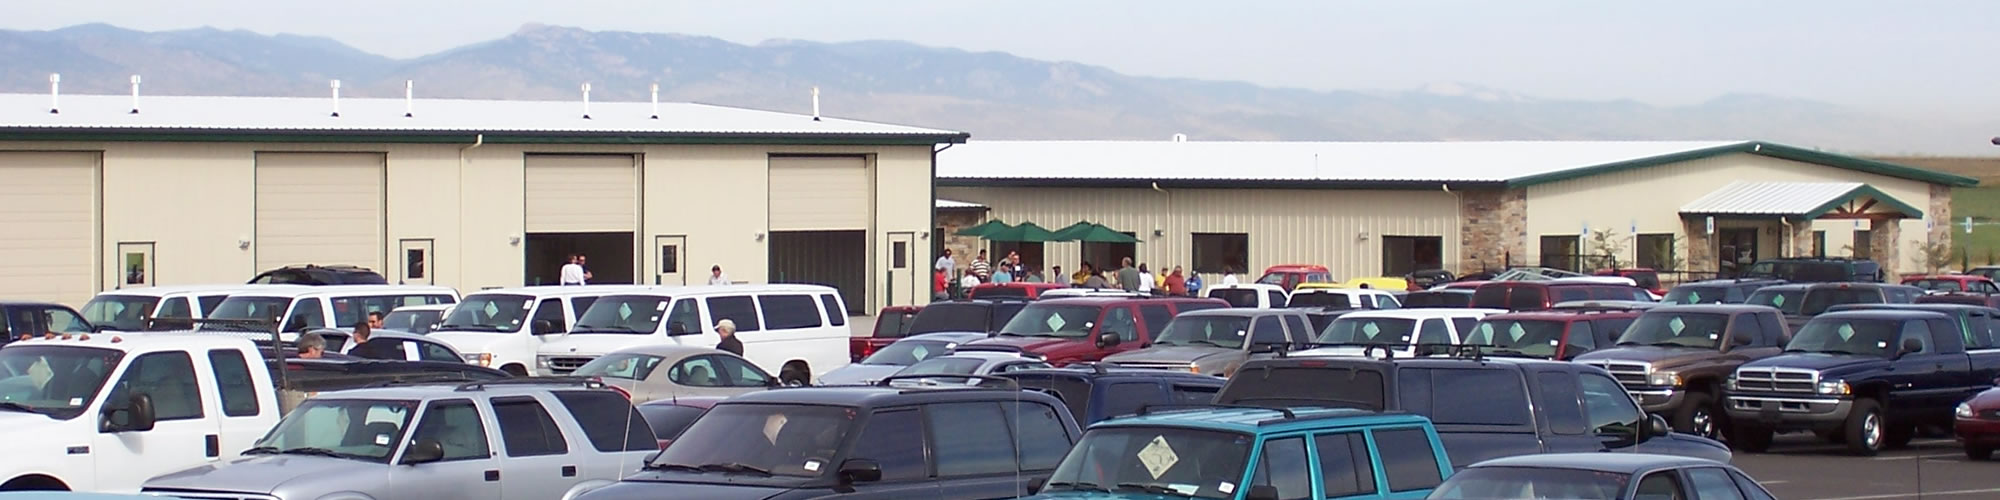 About Loveland Auto Auction in Colorado